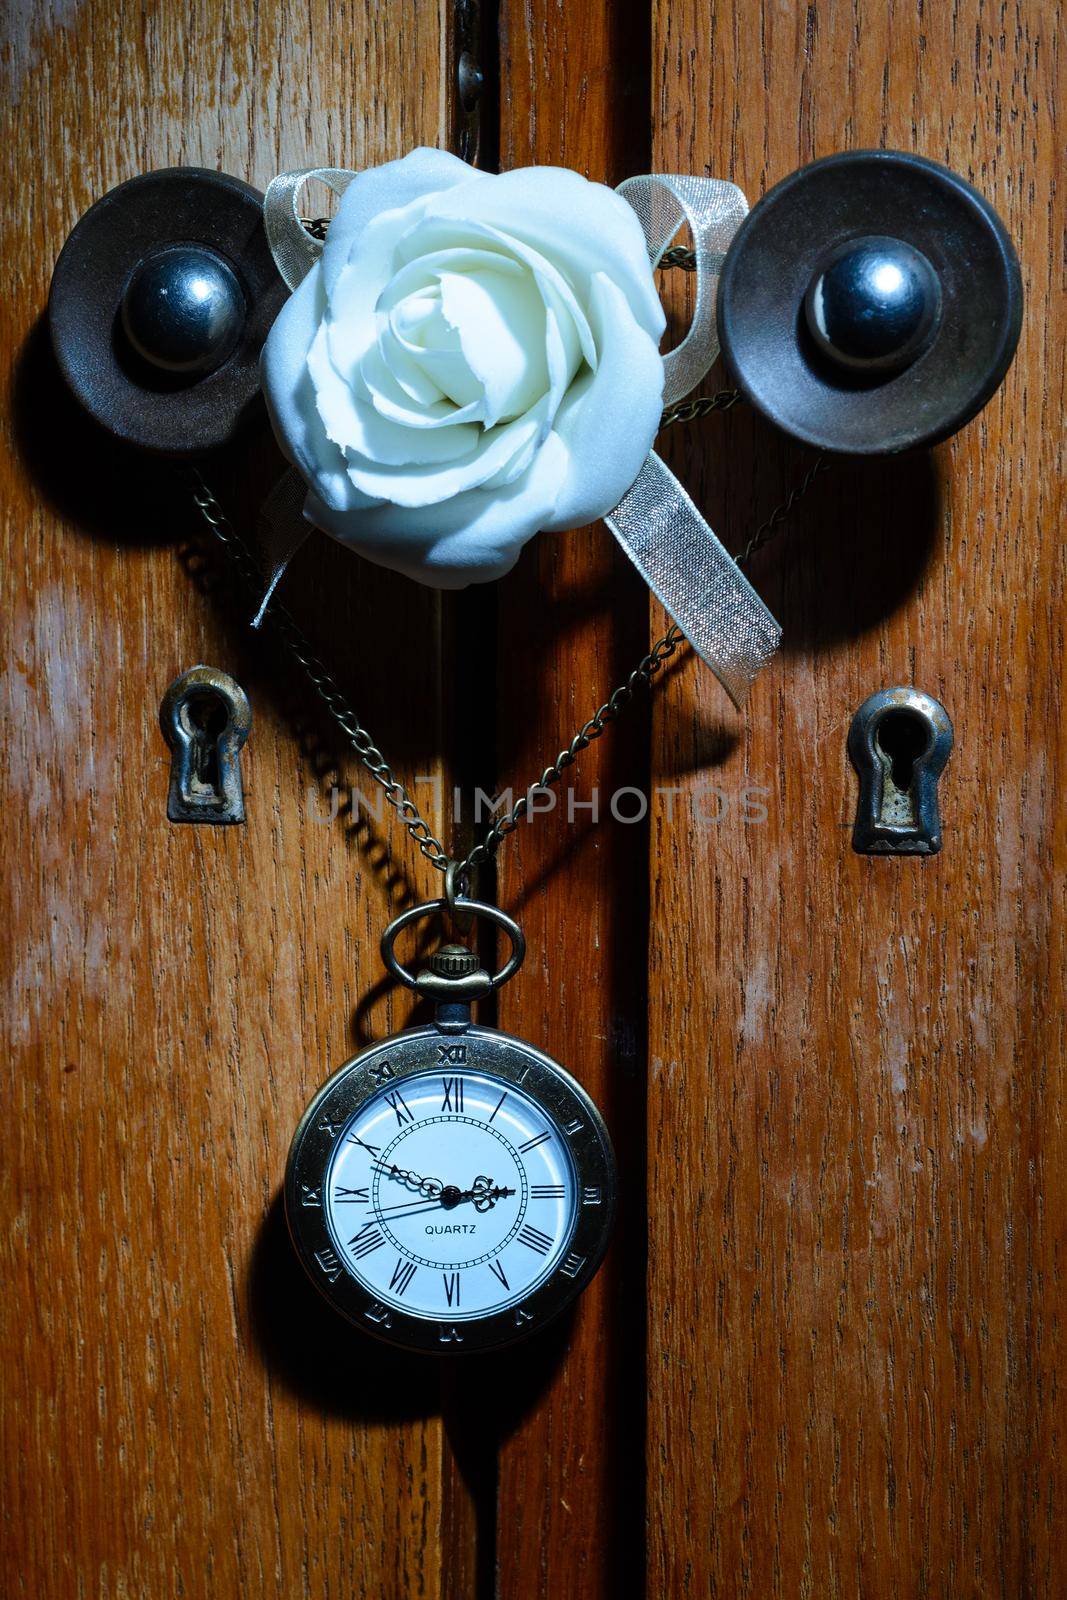 Pocket watch hanging on a chain on a cabinet handle with white rose flower